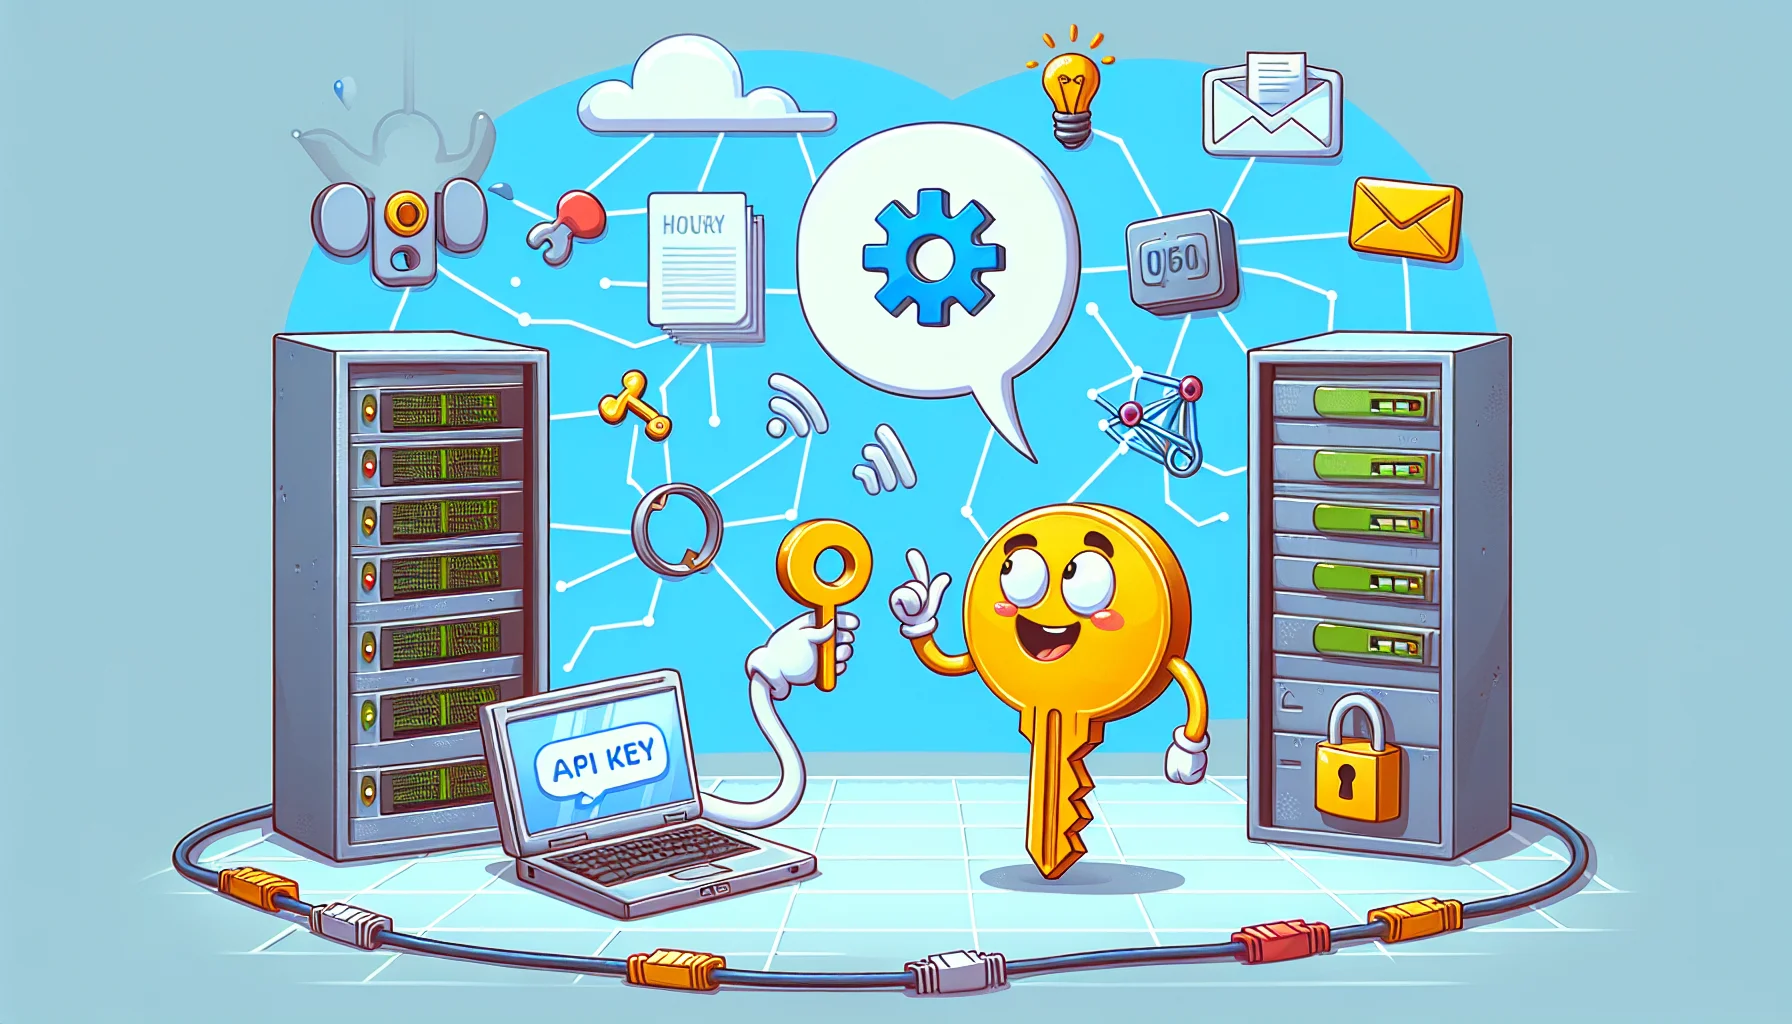 Create an amusing scene related to web hosting. Picture a lighthearted moment where an animated, anthropomorphic key, which is a representative for an API key, is engaging in a playful conversation with a cartoon laptop. They are surrounded by symbols of technology and web hosting - server racks, Ethernet cables, and browser icons. Additionally, include a speech bubble coming from the key, saying 'Only you have the power to unlock unlimited possibilities on the web!' to underline the vital role of API key in web hosting in a humorous way. No specific brand references should be depicted.